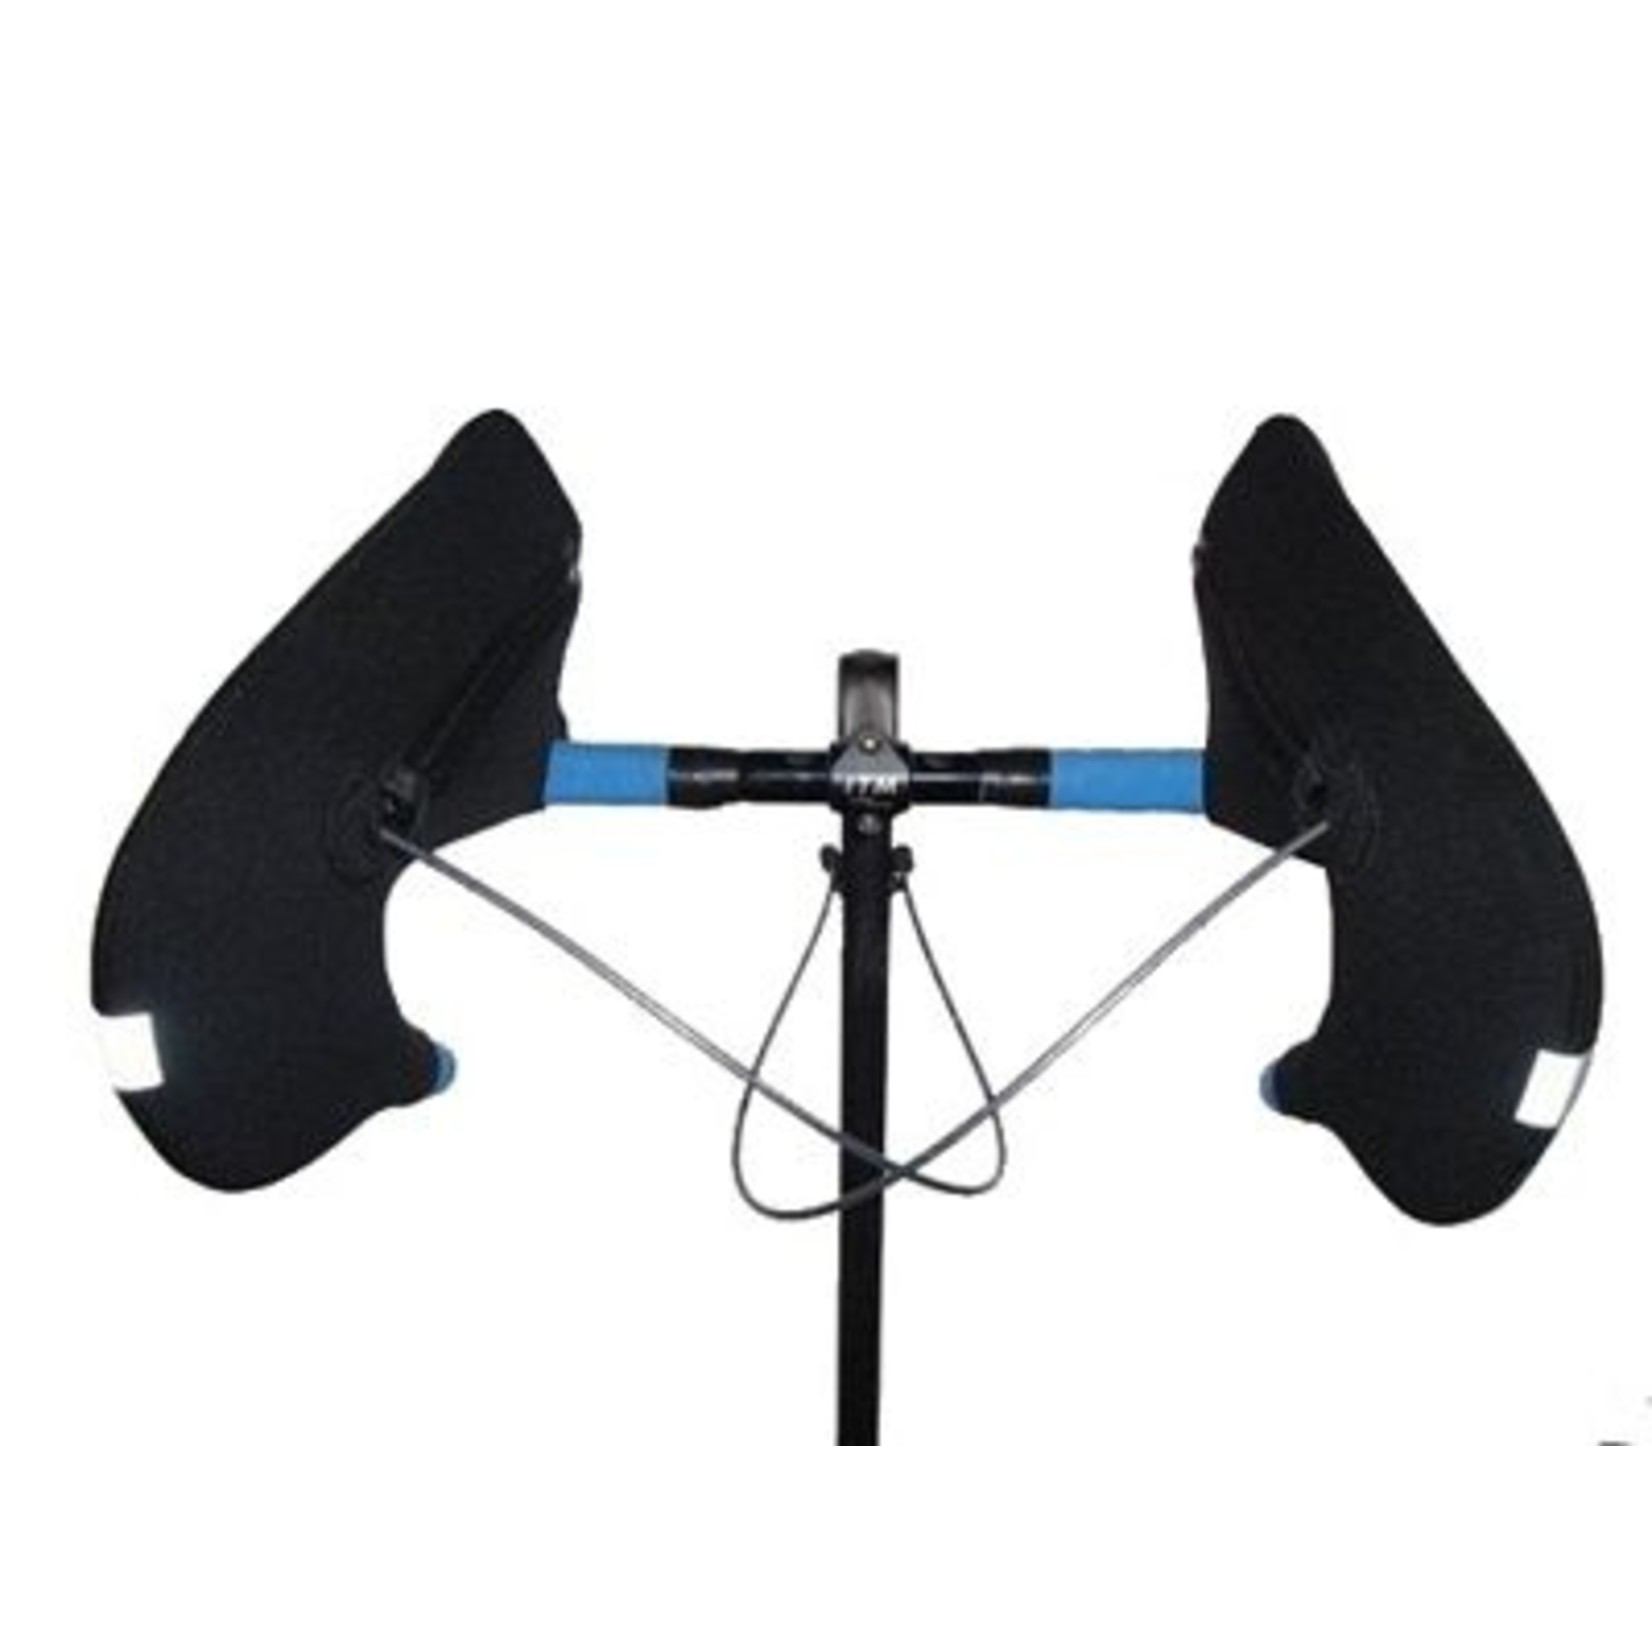 Bar Mitts Road/Drop Bar with External Cable Routing - Small